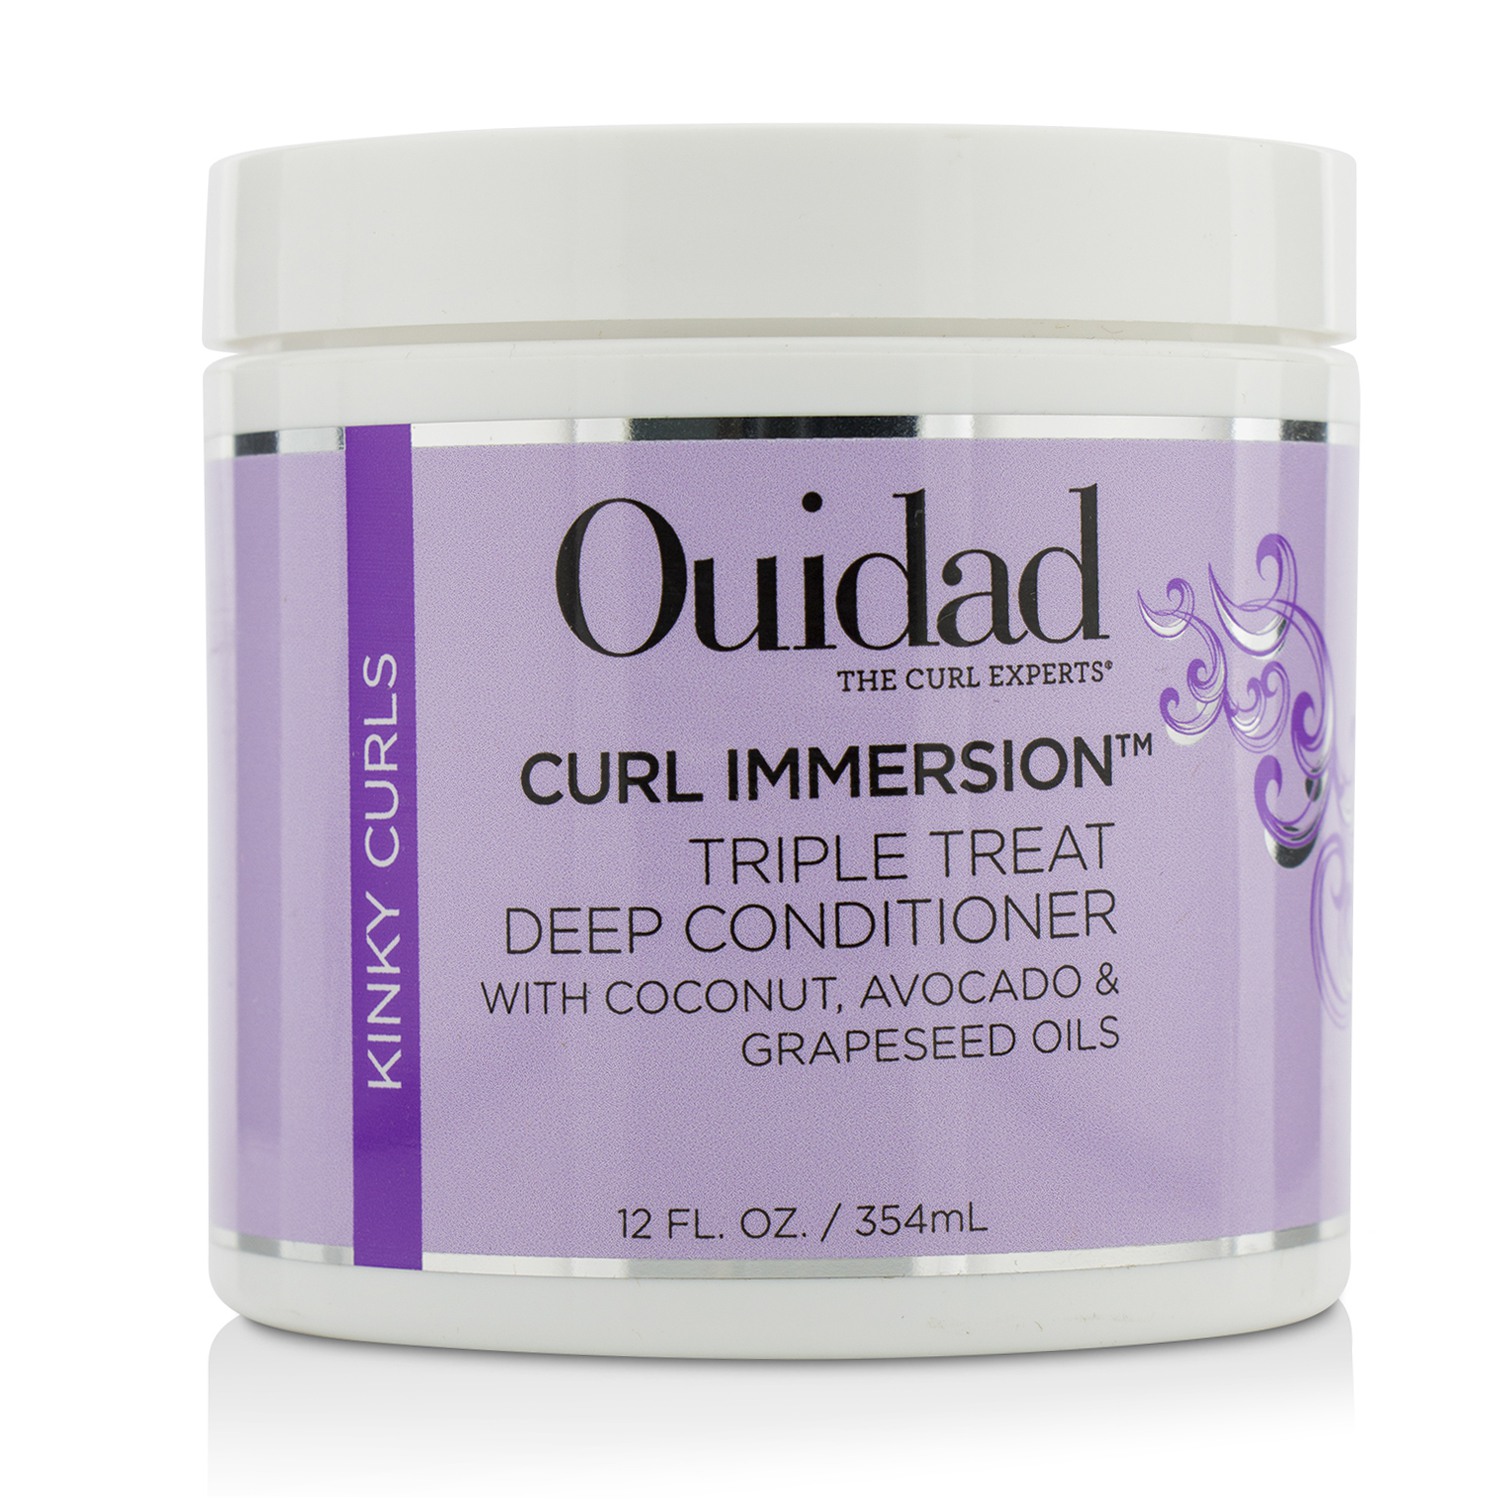 Curl Immersion Triple Treat Deep Conditioner (Kinky Curls) Ouidad Image